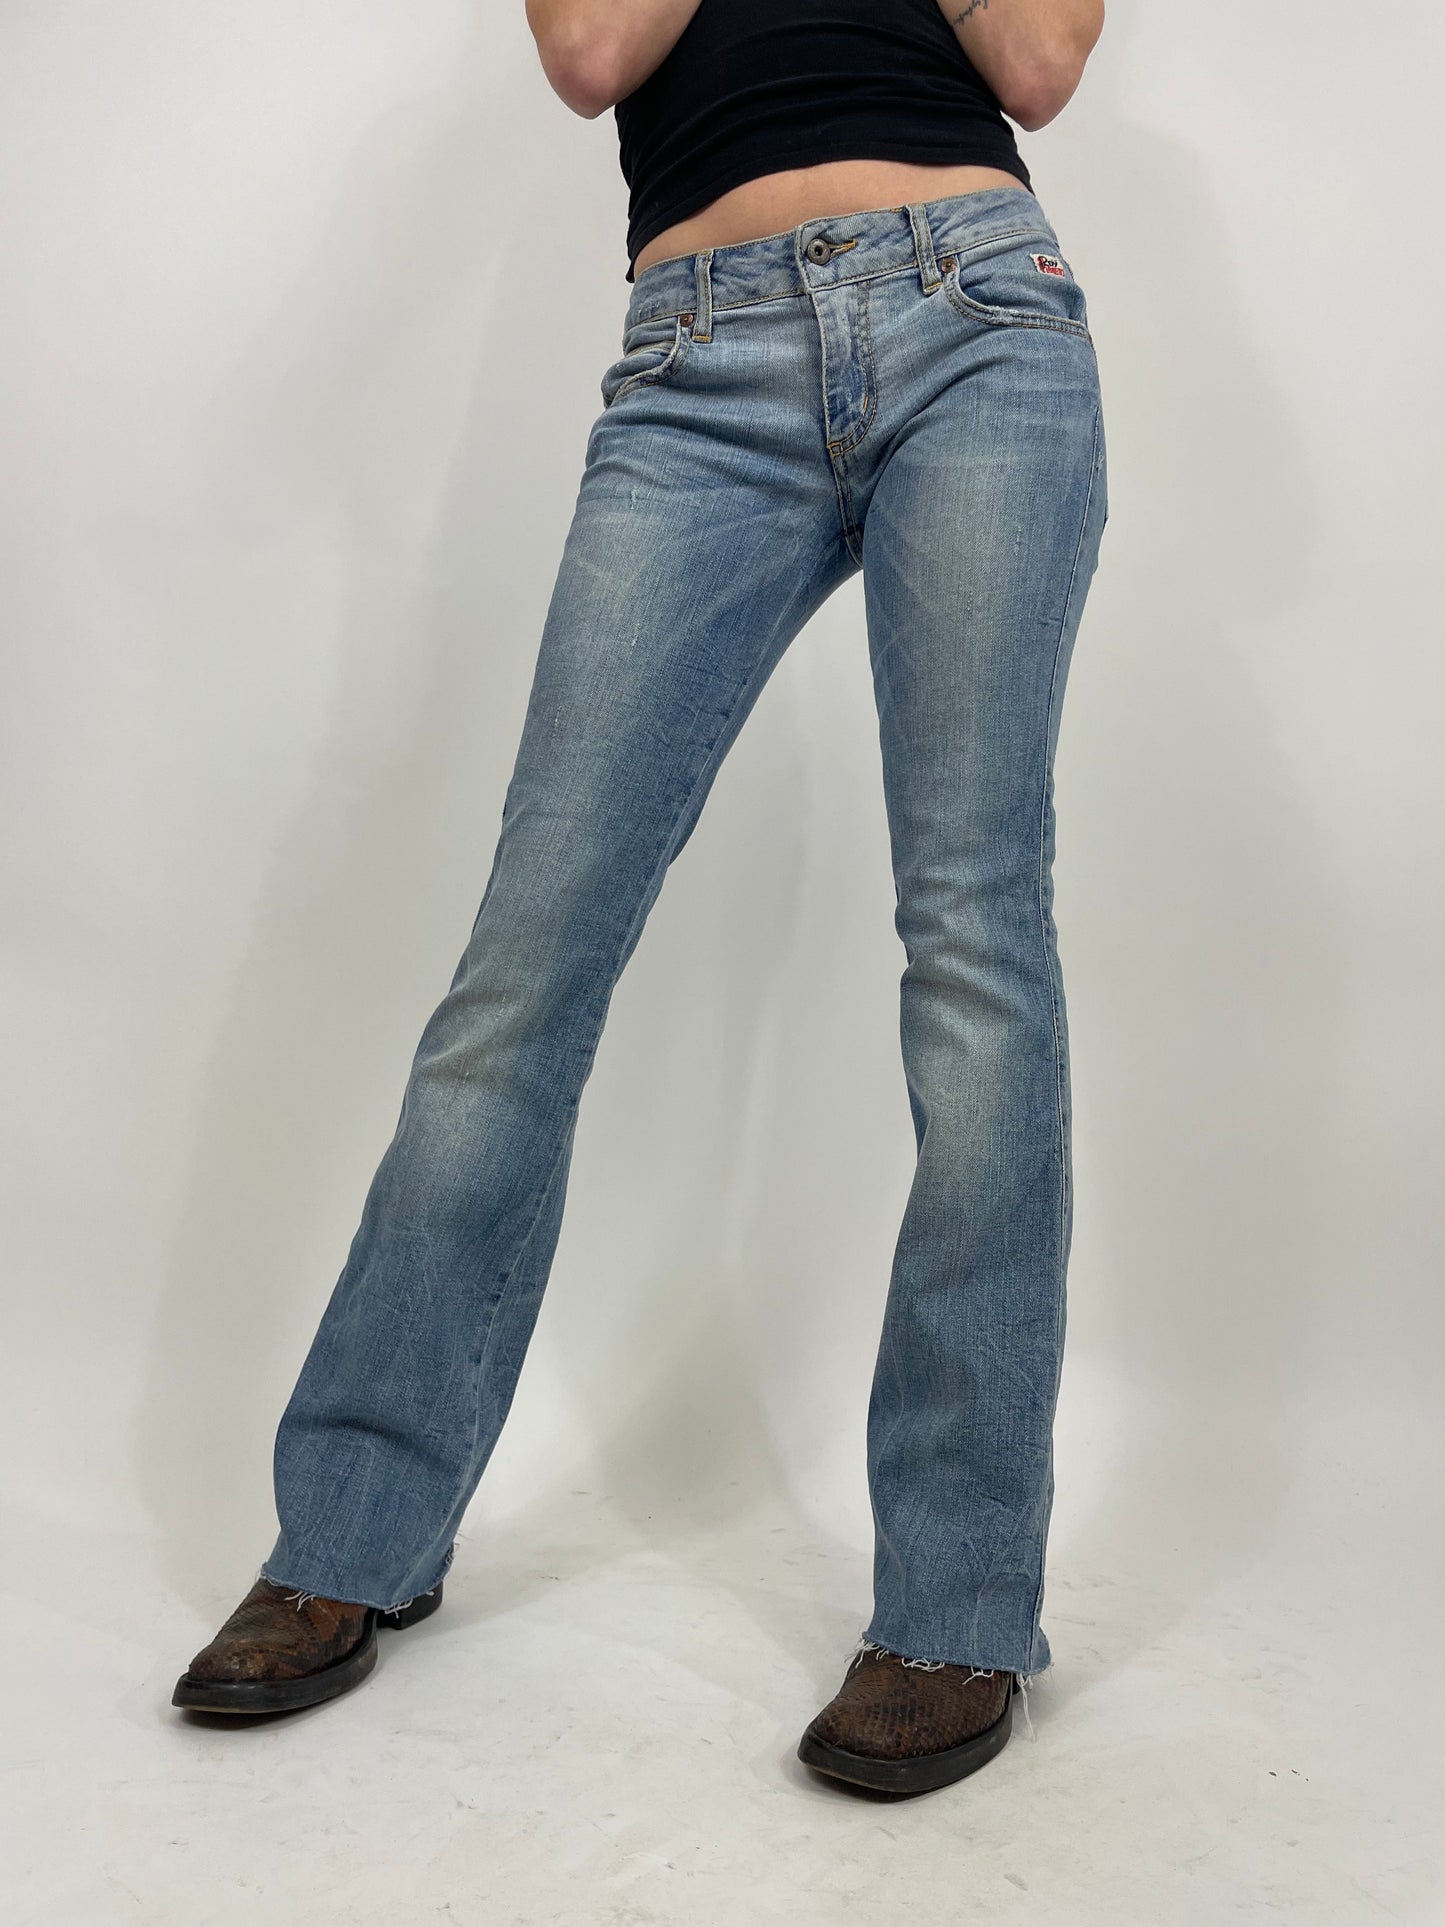 Roy Rogers Jeans